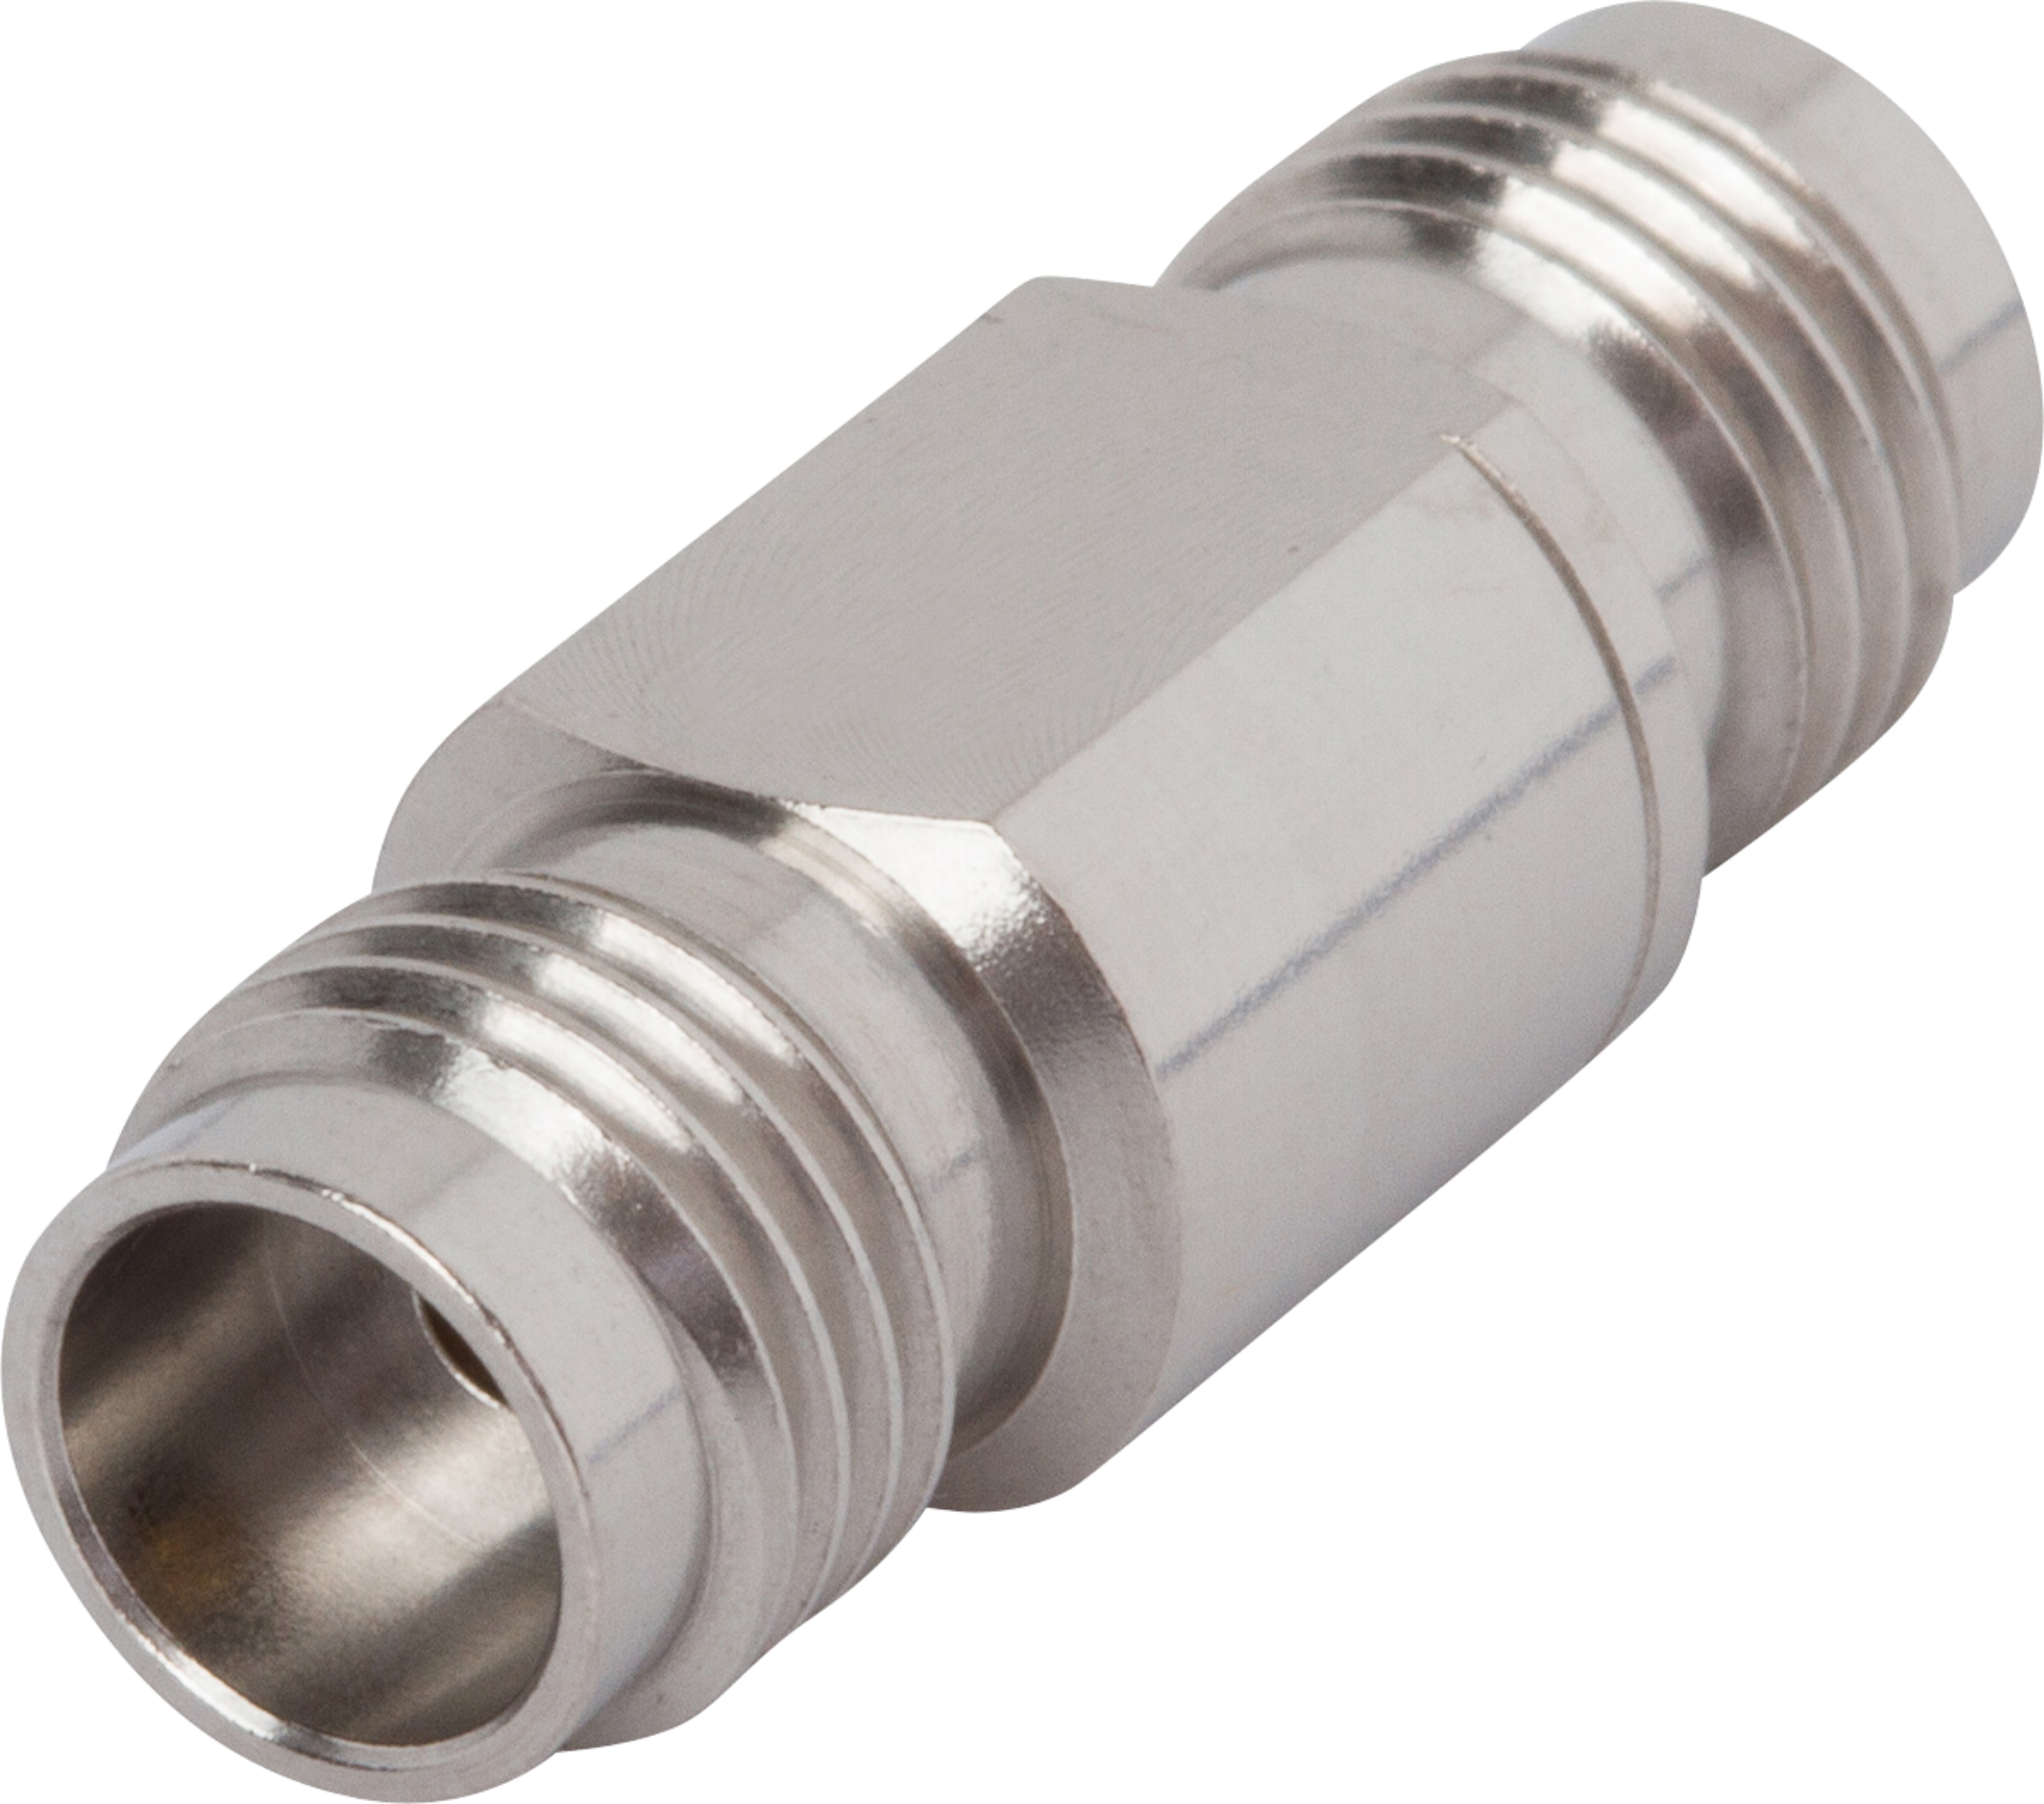 1.85mm Female to 2.4mm Female Adapter, SF1133-6003